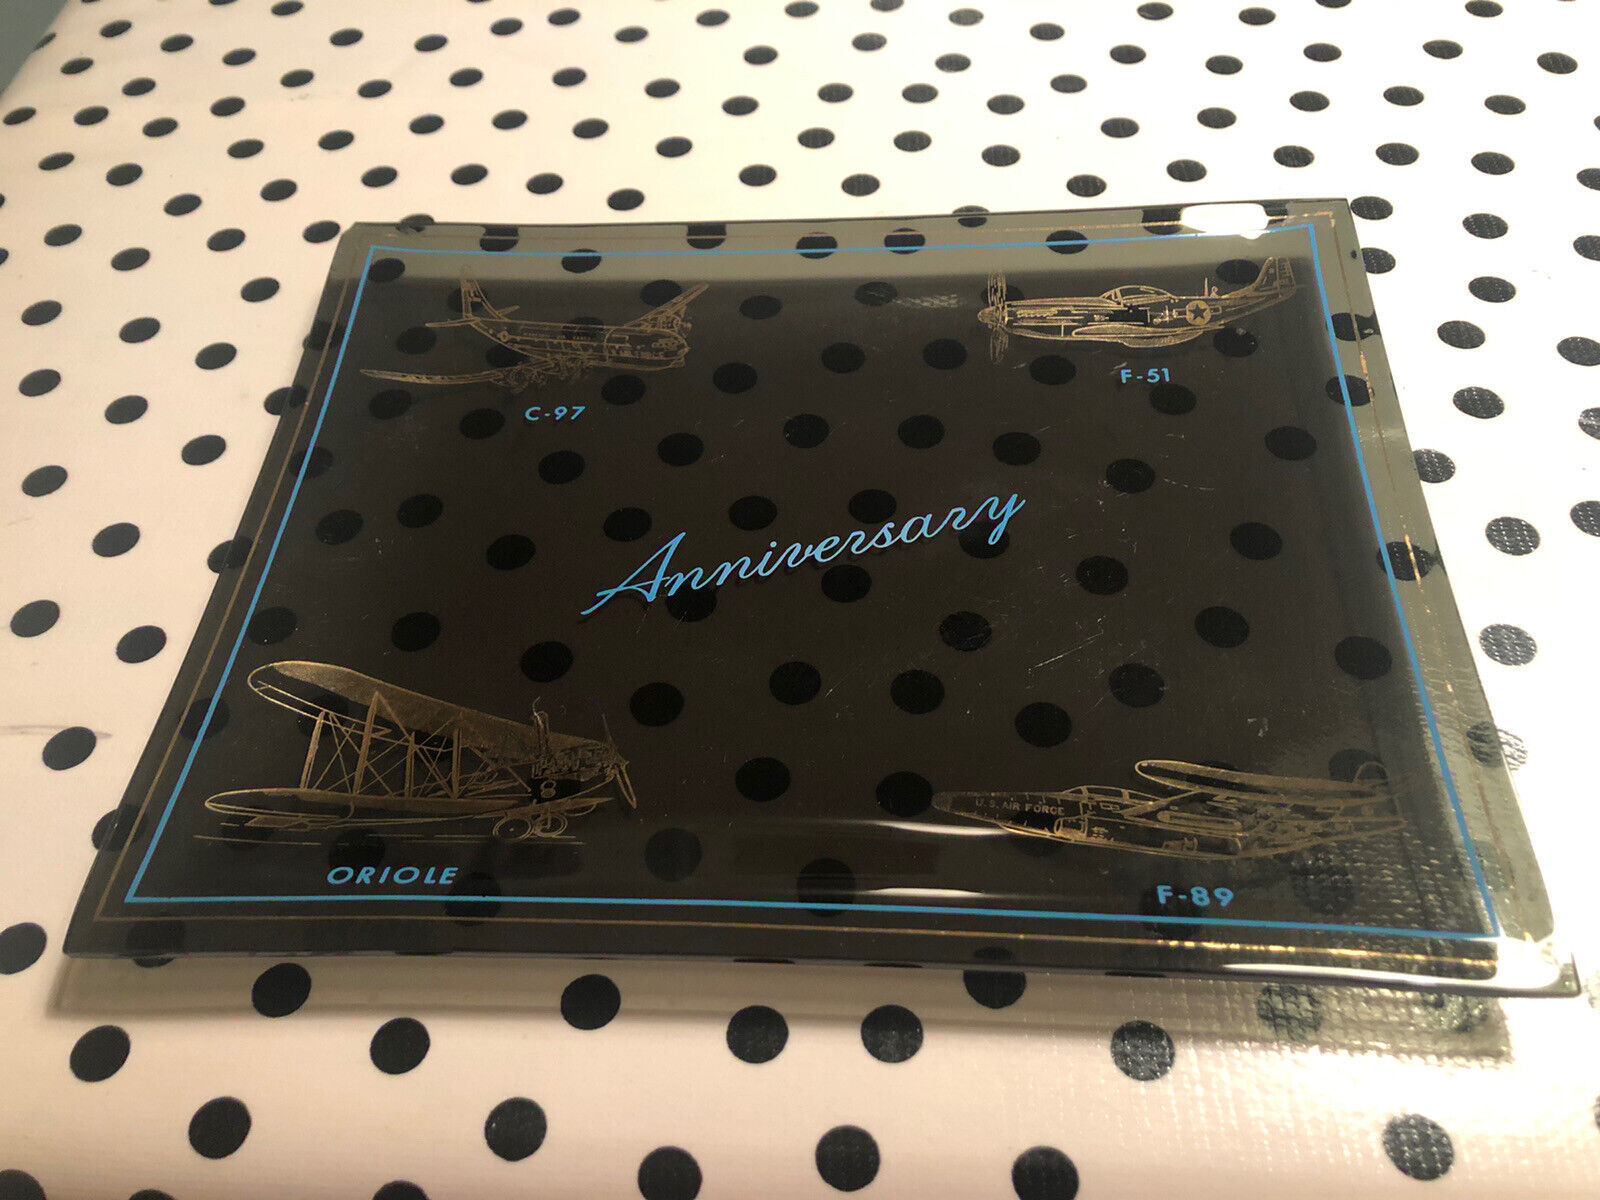 Vintage Air Force Aircraft Anniversary Glass Plate 9”x 7”. F-51, C-97, F-89